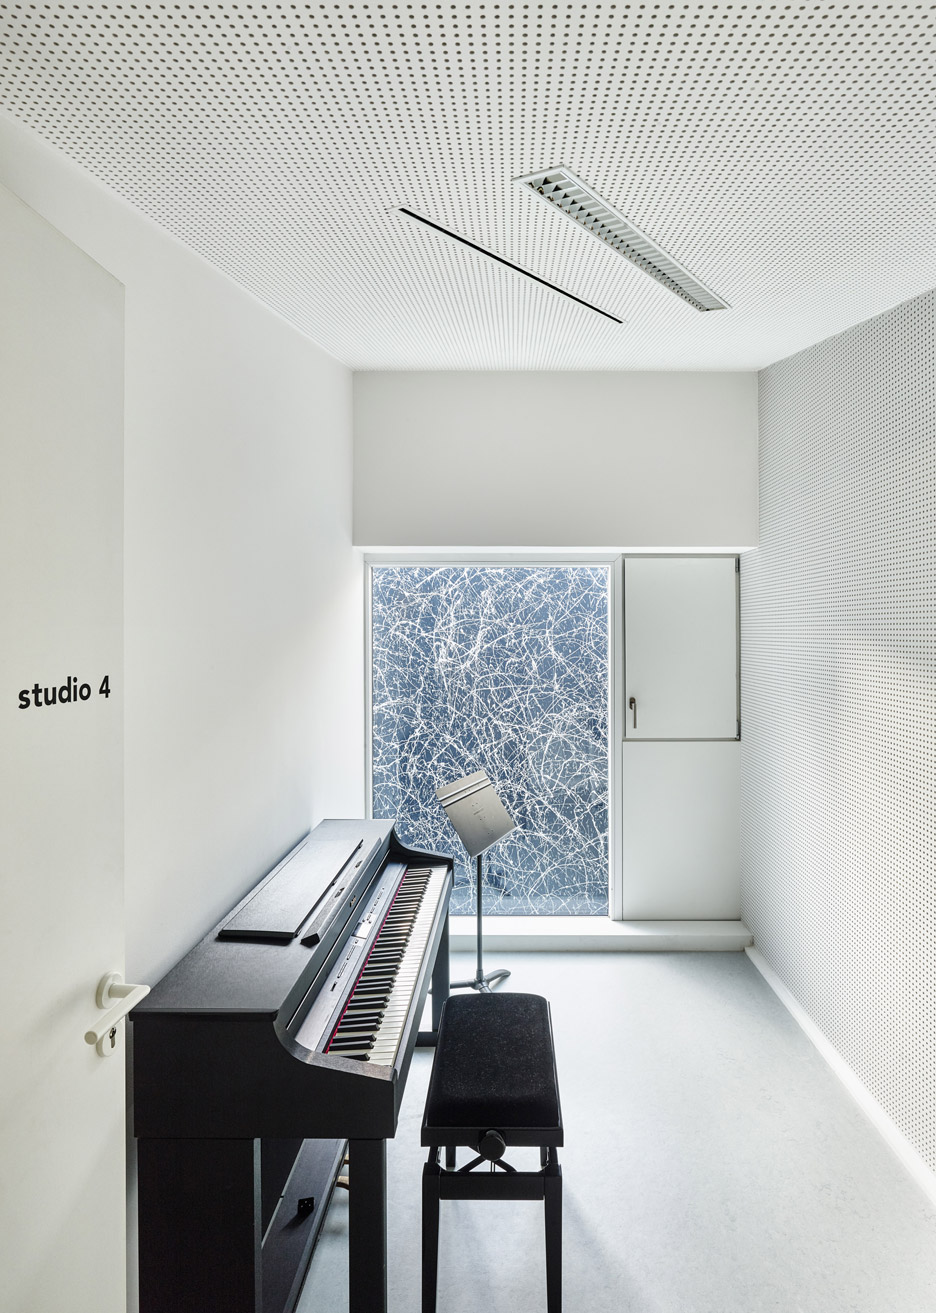 Music school in Belfort by Dominique Coulon & Associes